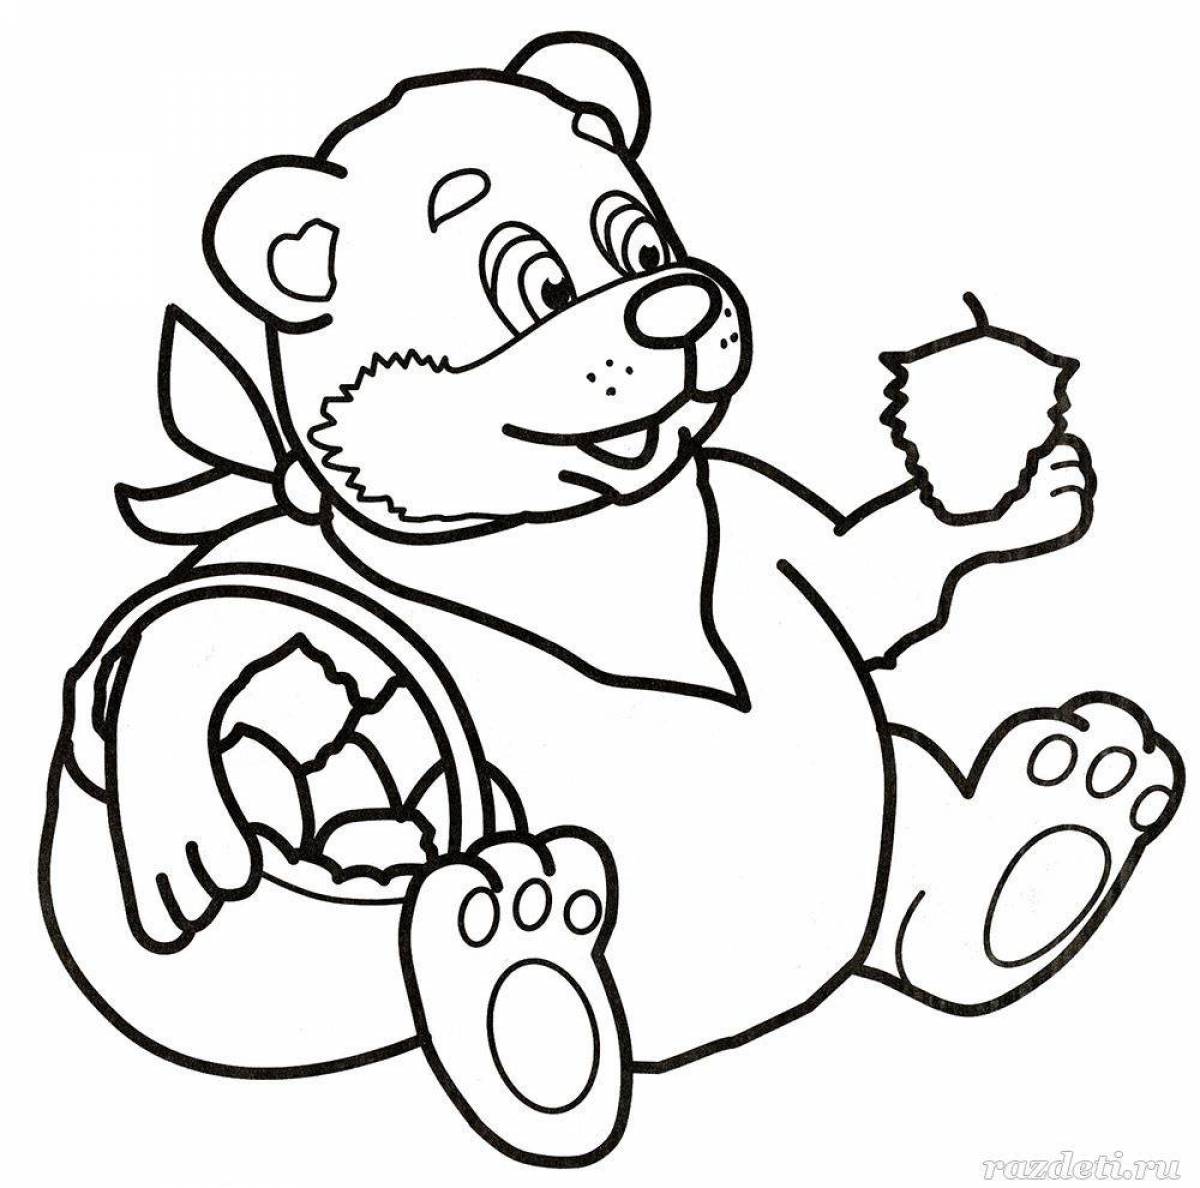 Fun coloring bear for children 3-4 years old